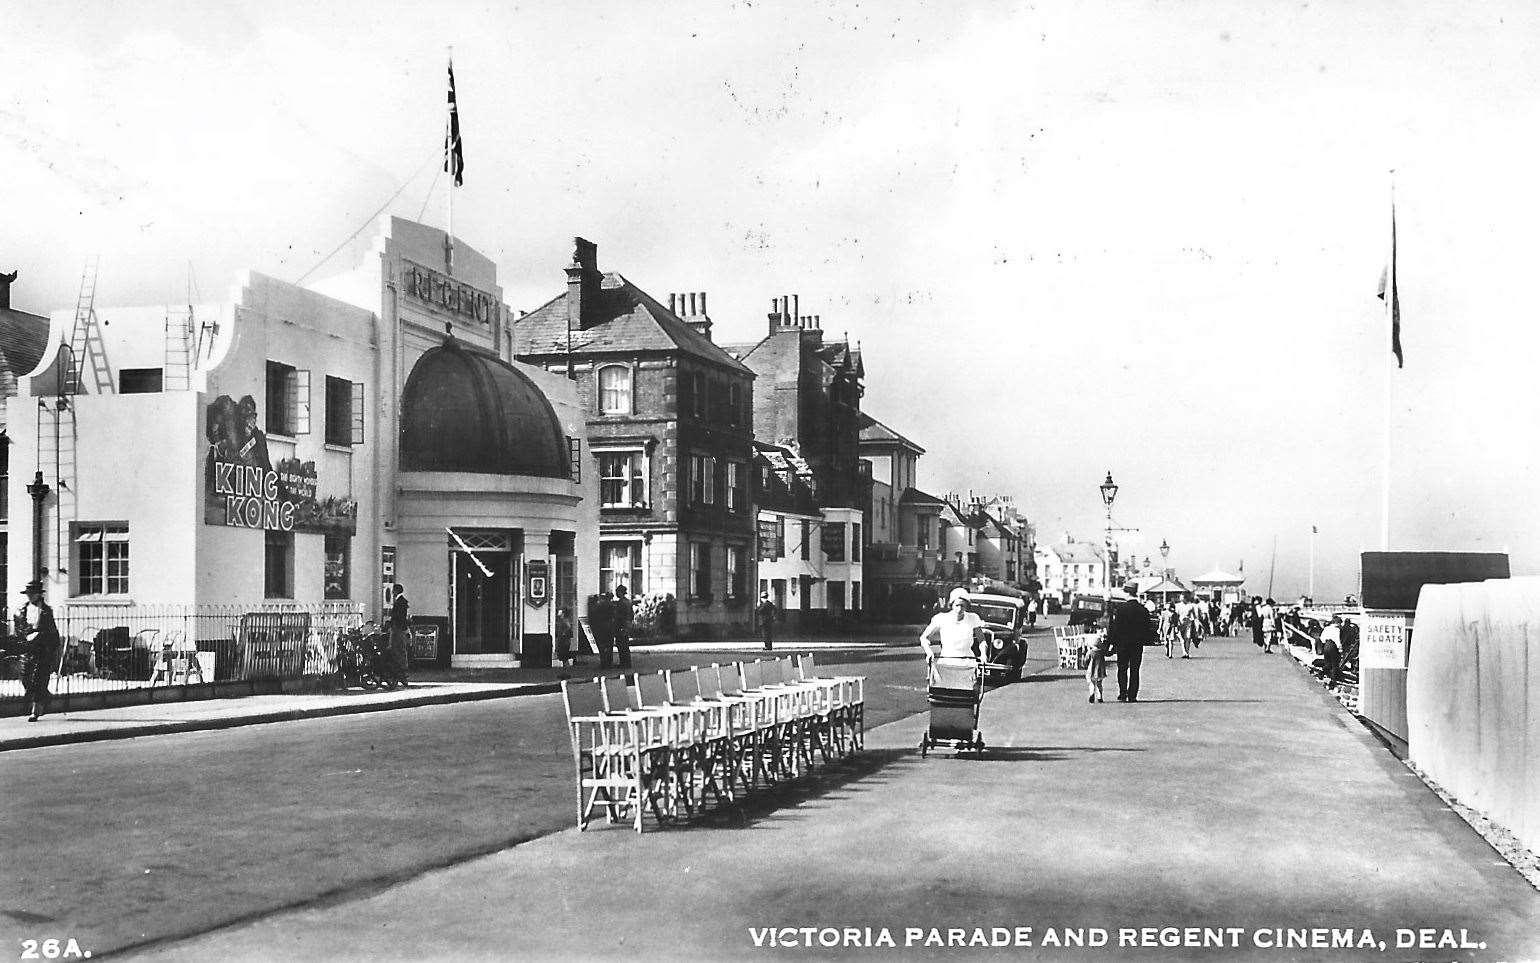 An old picture of Deal, showing The Regent cinema